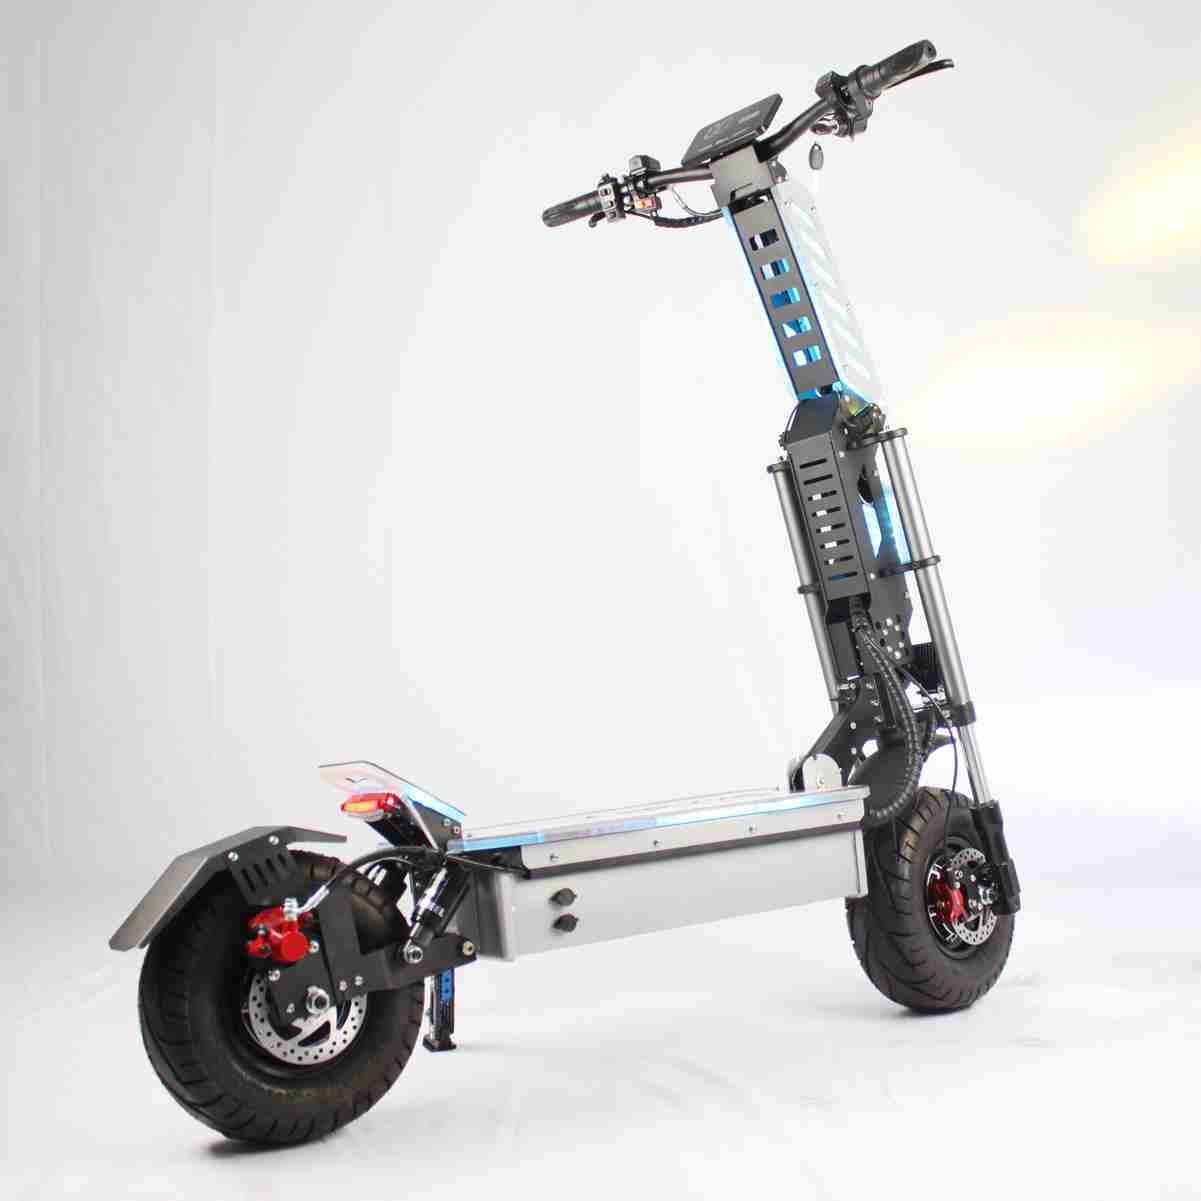 Best Motor Scooter For Commuting